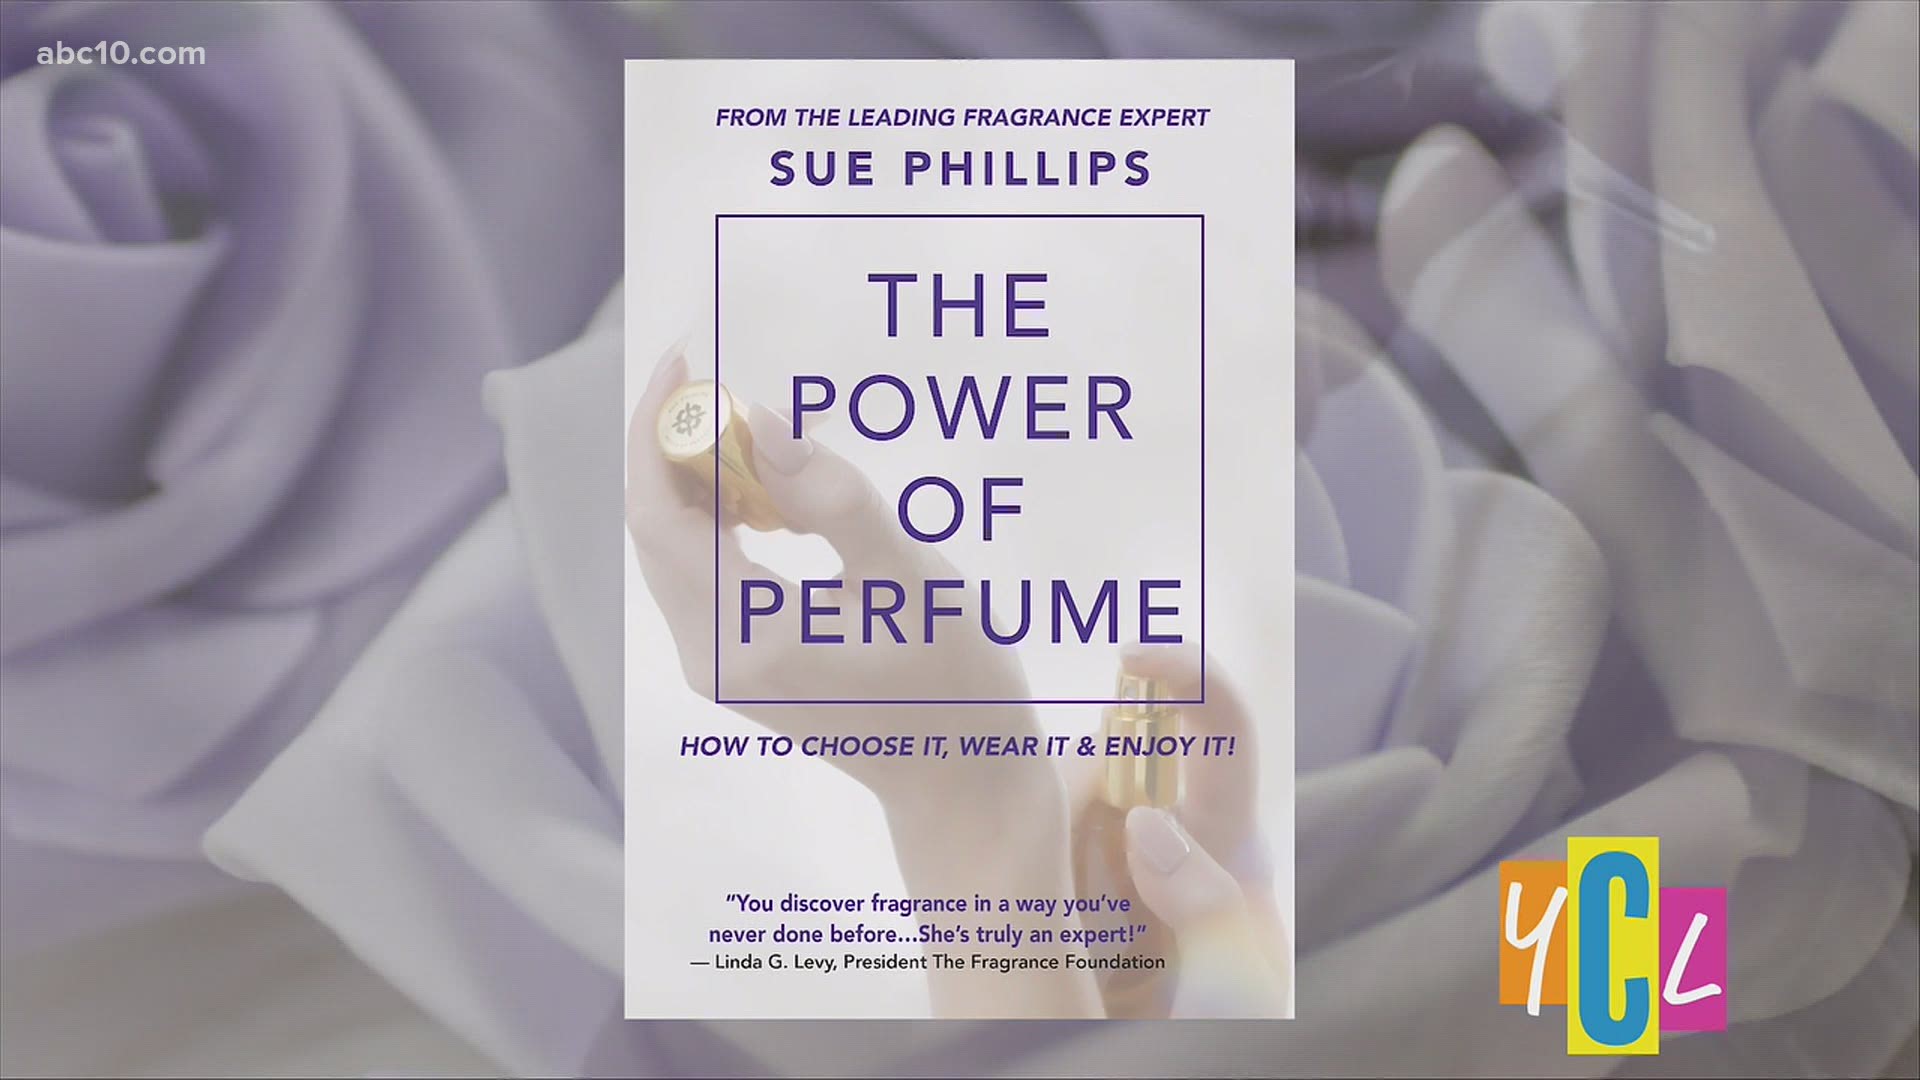 A picture can say a thousand words, but a scent say a lot too. We’ll talk about the power of perfume, how to choose it, wear it and enjoy the aroma!